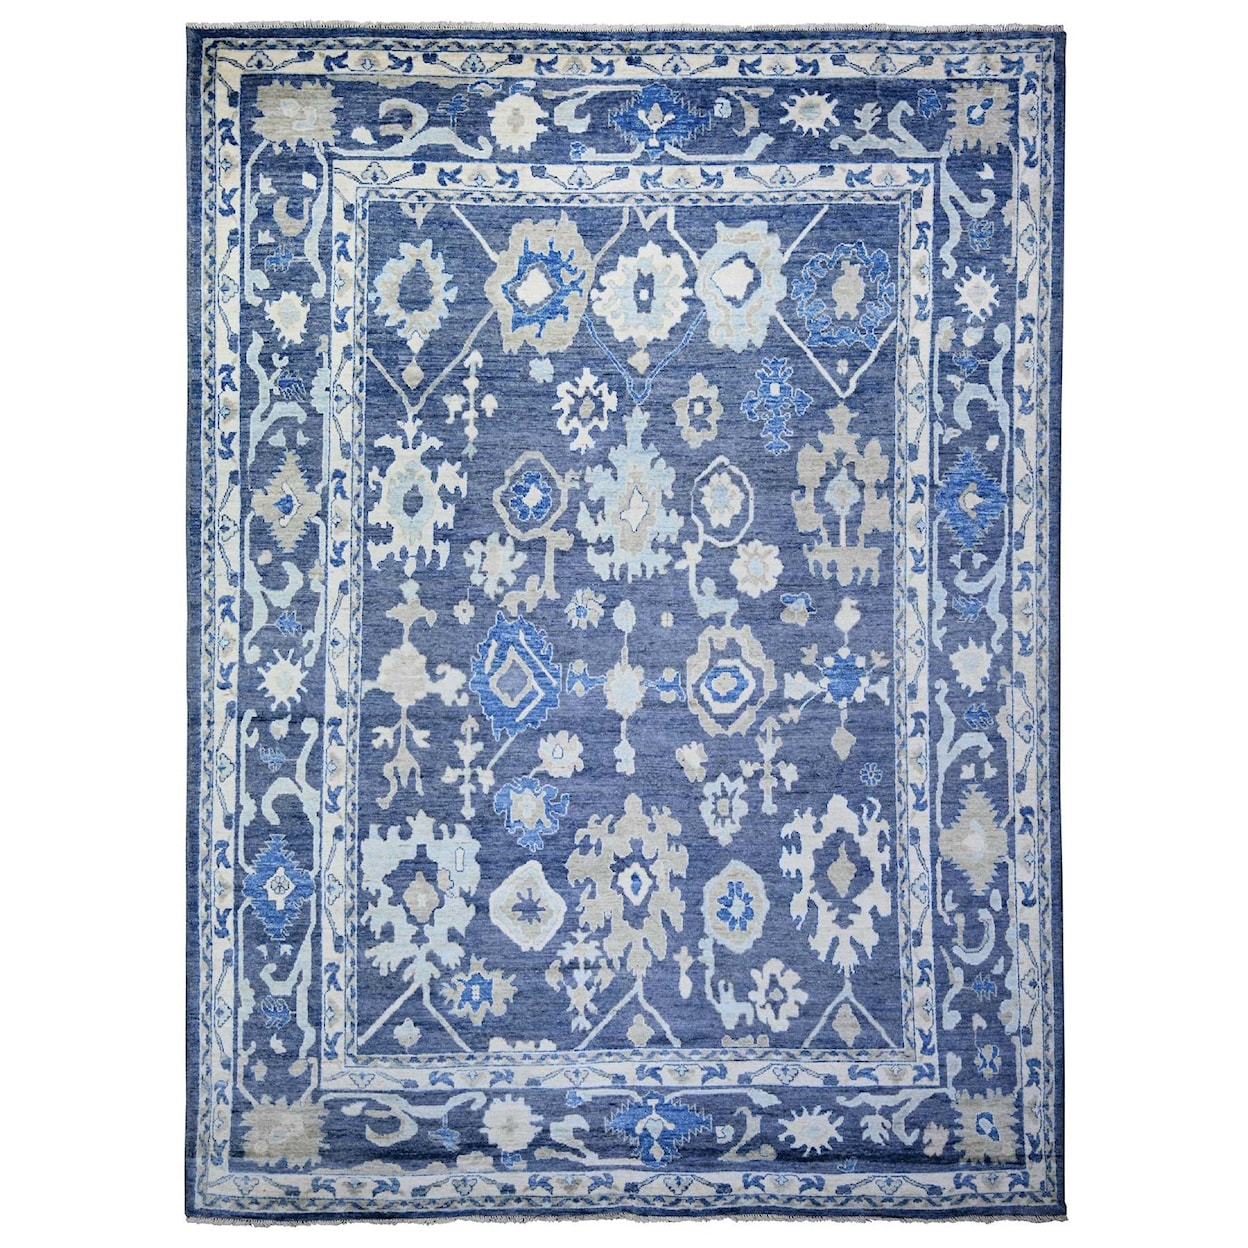 ORC Rugs oushak-and-ziegler-mahal-rugs 10x14  Rug